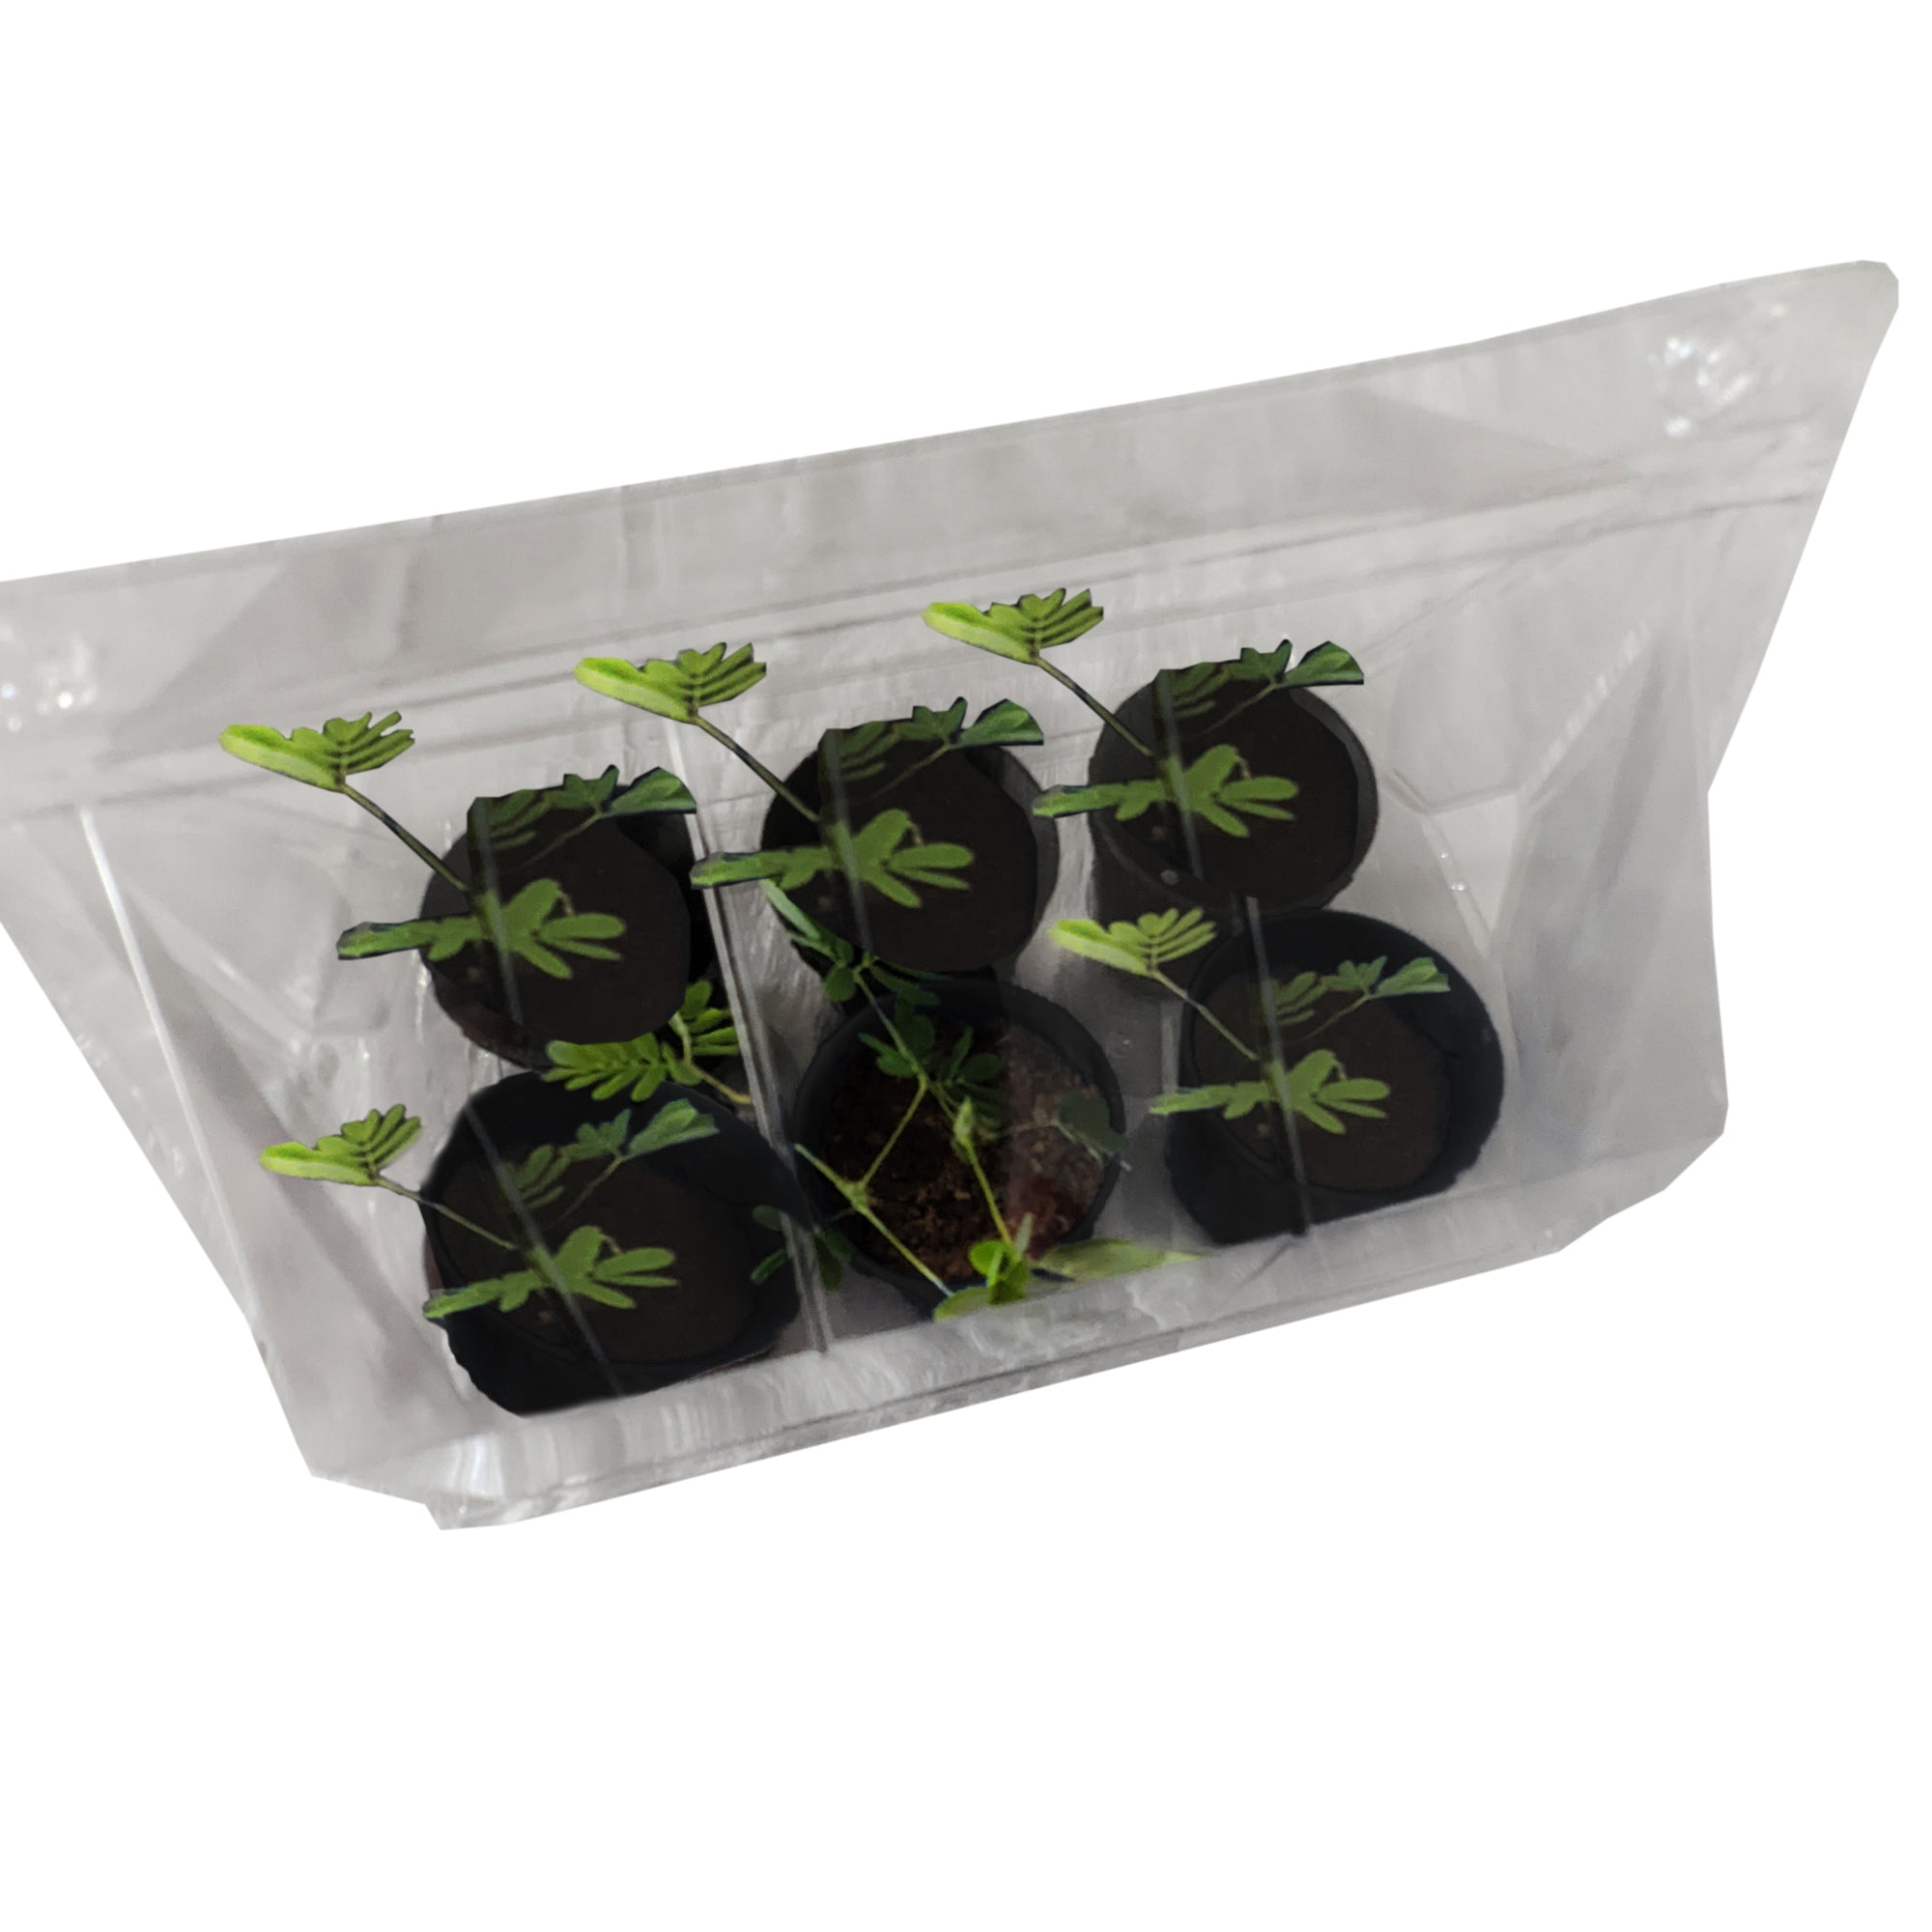 ZOMBIE PLANT GROW KIT- (Touch It and It PLAYS DEAD!)